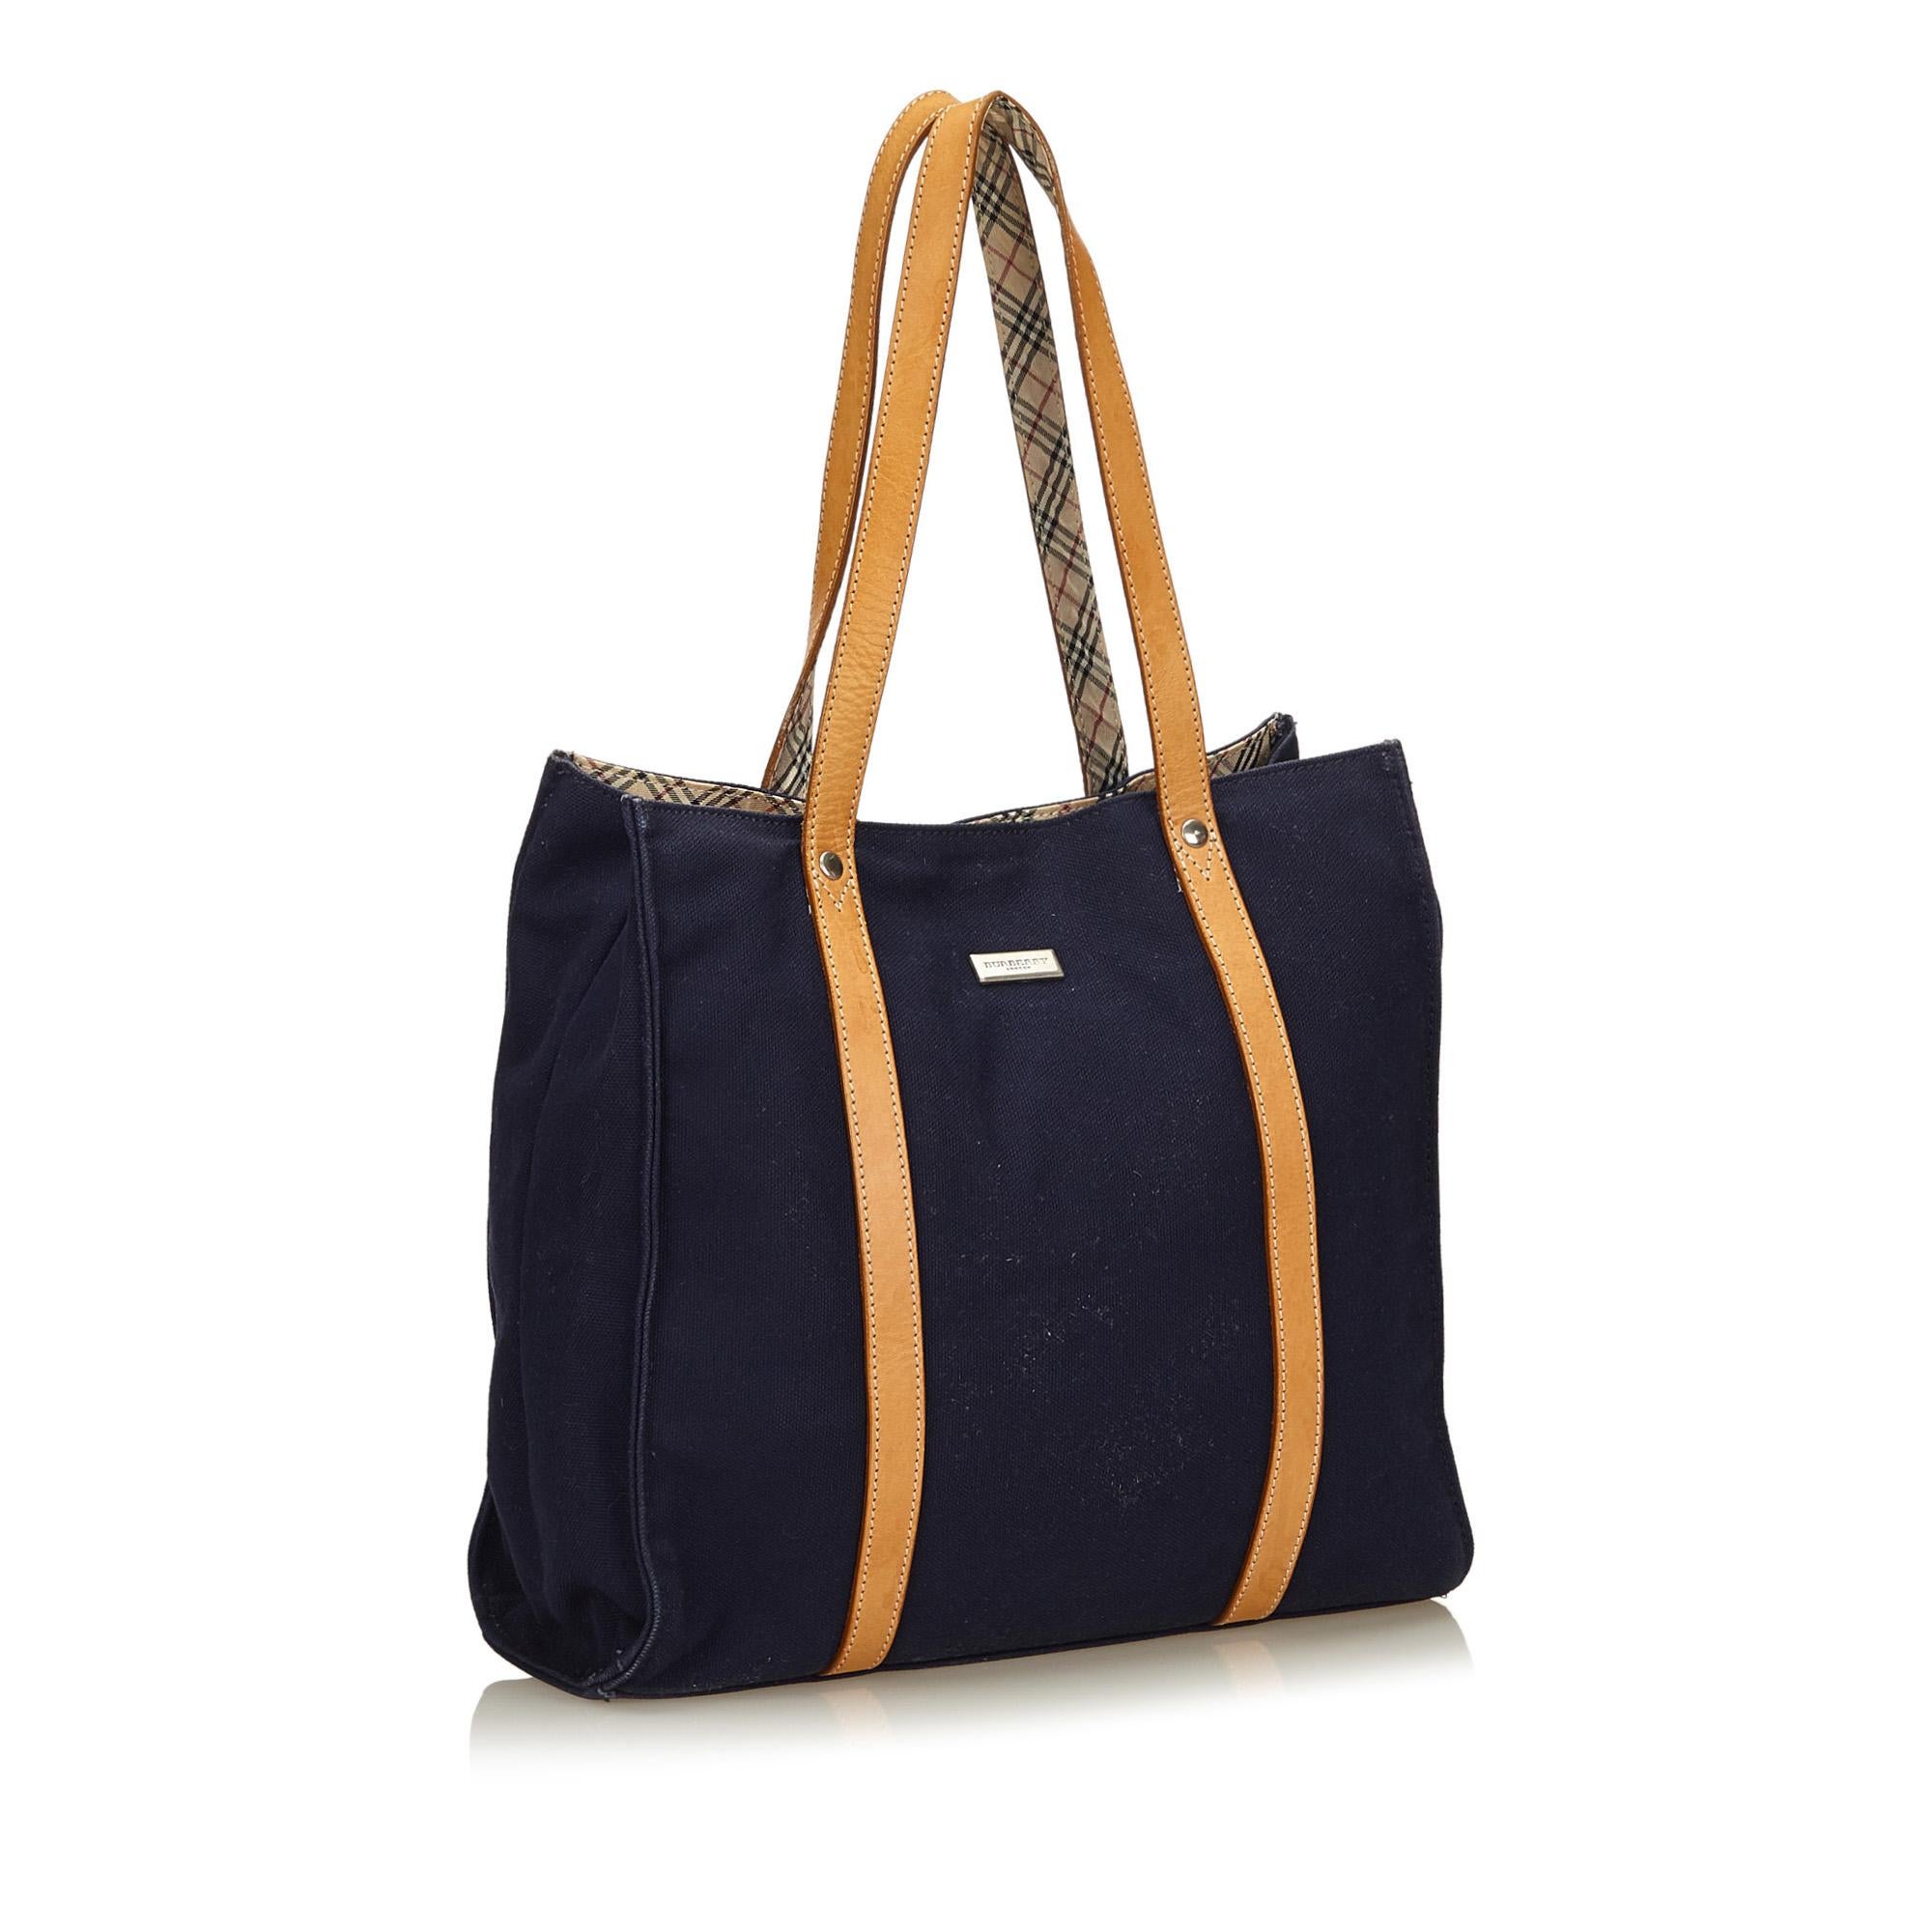 This tote bag features a canvas body, flat handles, and an open top with magnetic closure. It carries as B+ condition rating.

Inclusions: 
This item does not come with inclusions.

Dimensions:
Length: 28.00 cm
Width: 30.00 cm
Depth: 10.00